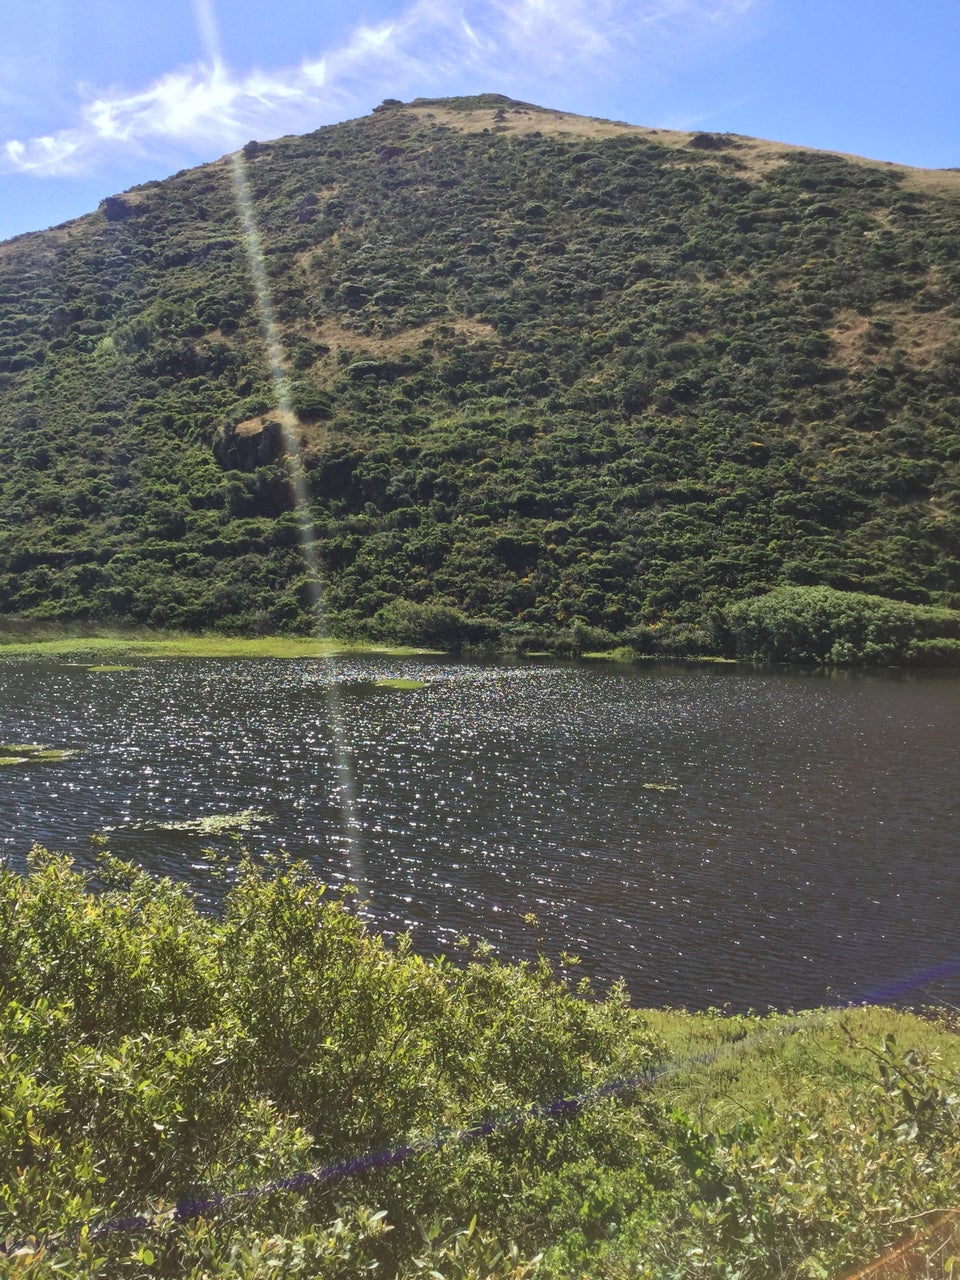 Sunlight glistening on a lagoon, light green bushes in the foreground, dark green bushes on the hill in the back